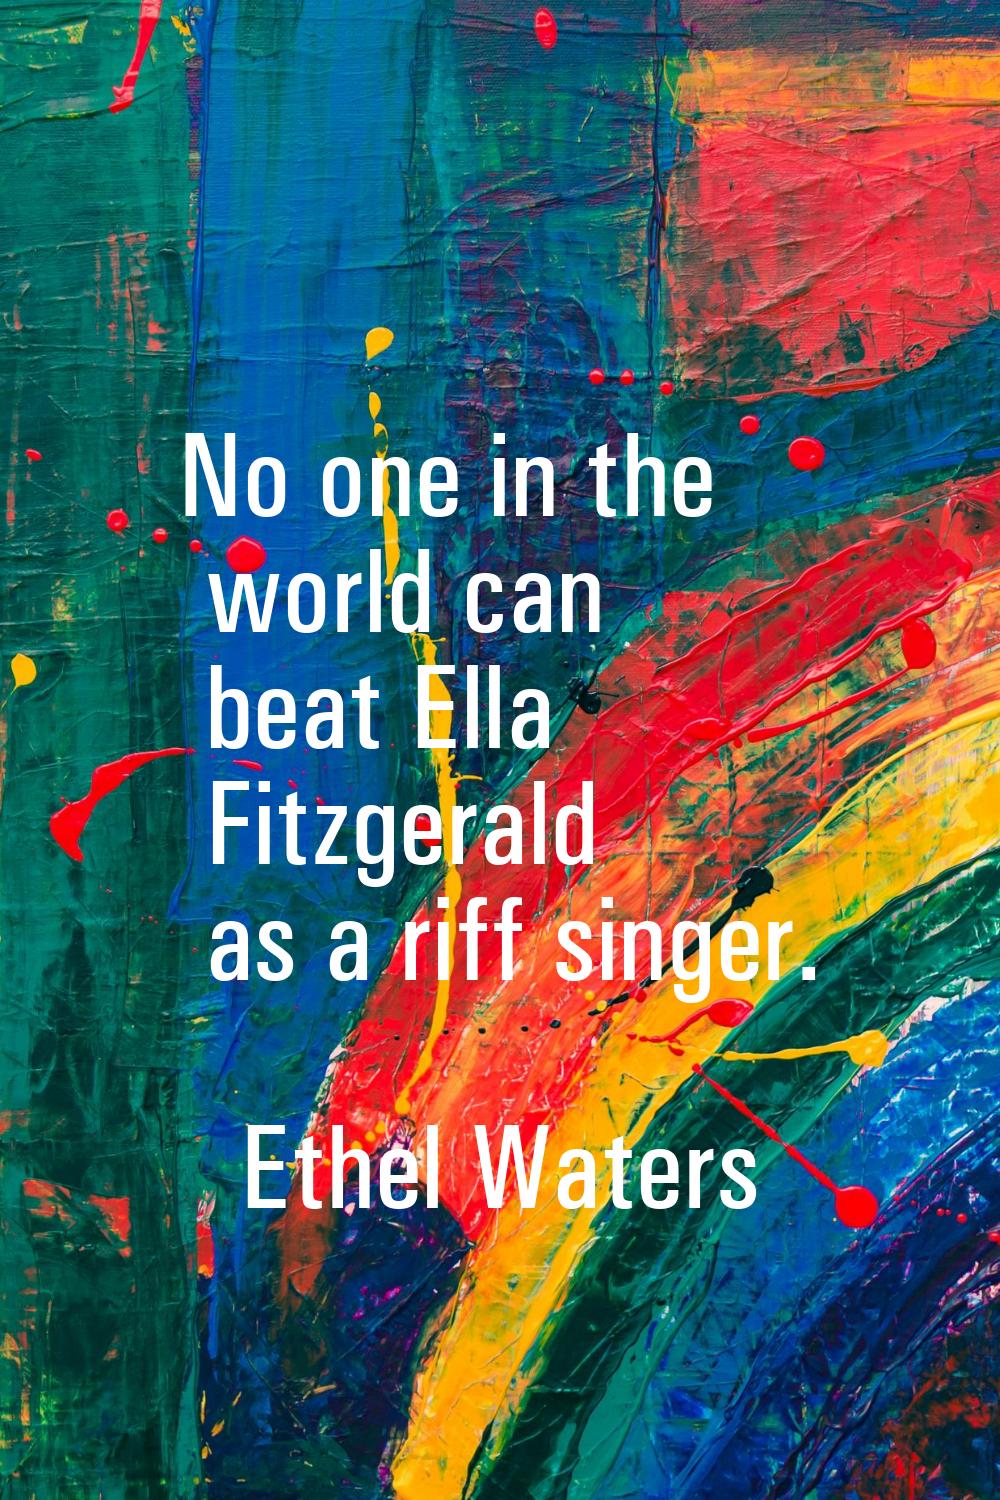 No one in the world can beat Ella Fitzgerald as a riff singer.